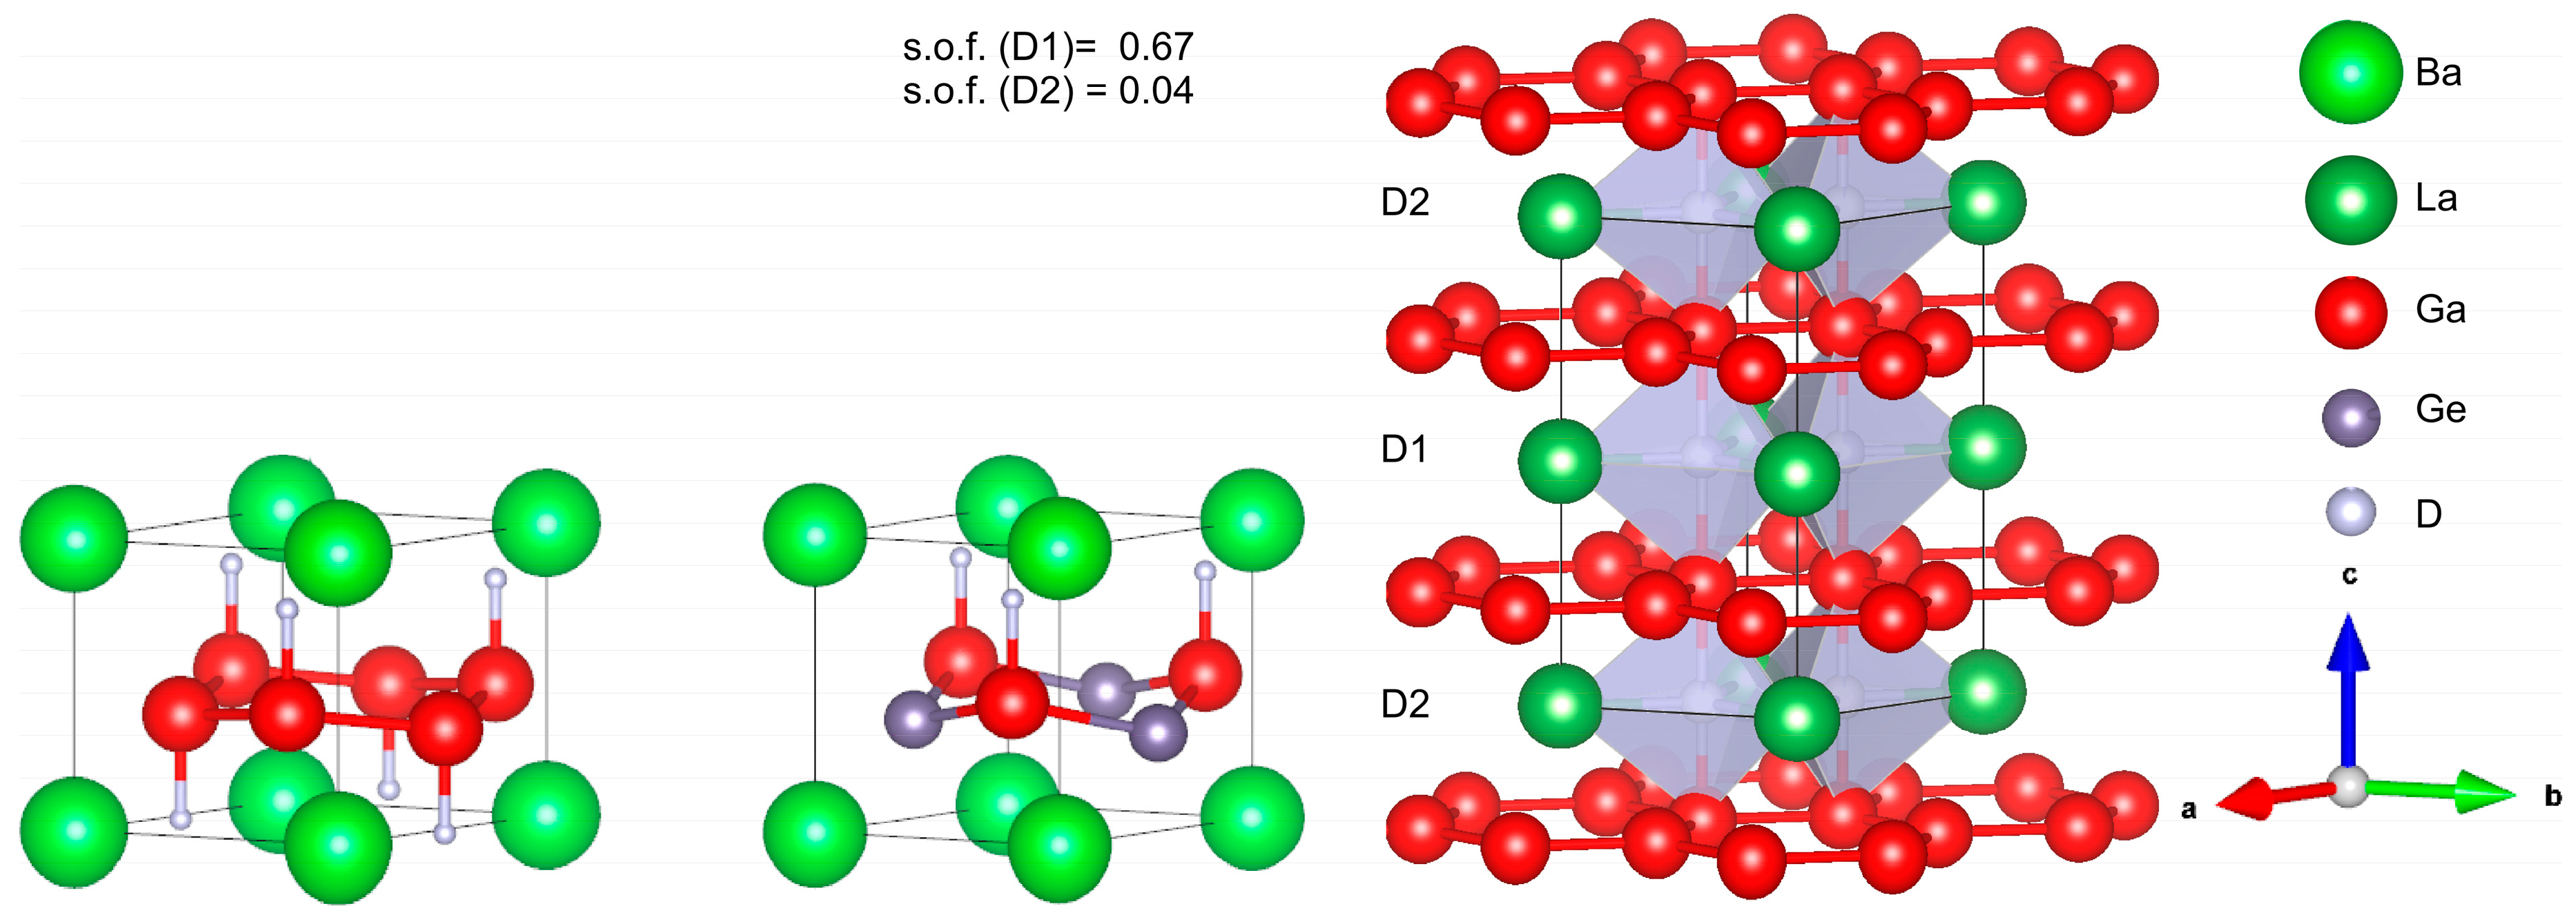 Crystals | Free Full-Text | Hydrogenation Properties of LnAl2 (Ln = La, Eu,  Yb), LaGa2, LaSi2 and the Crystal Structure of LaGa2H0.71(2)